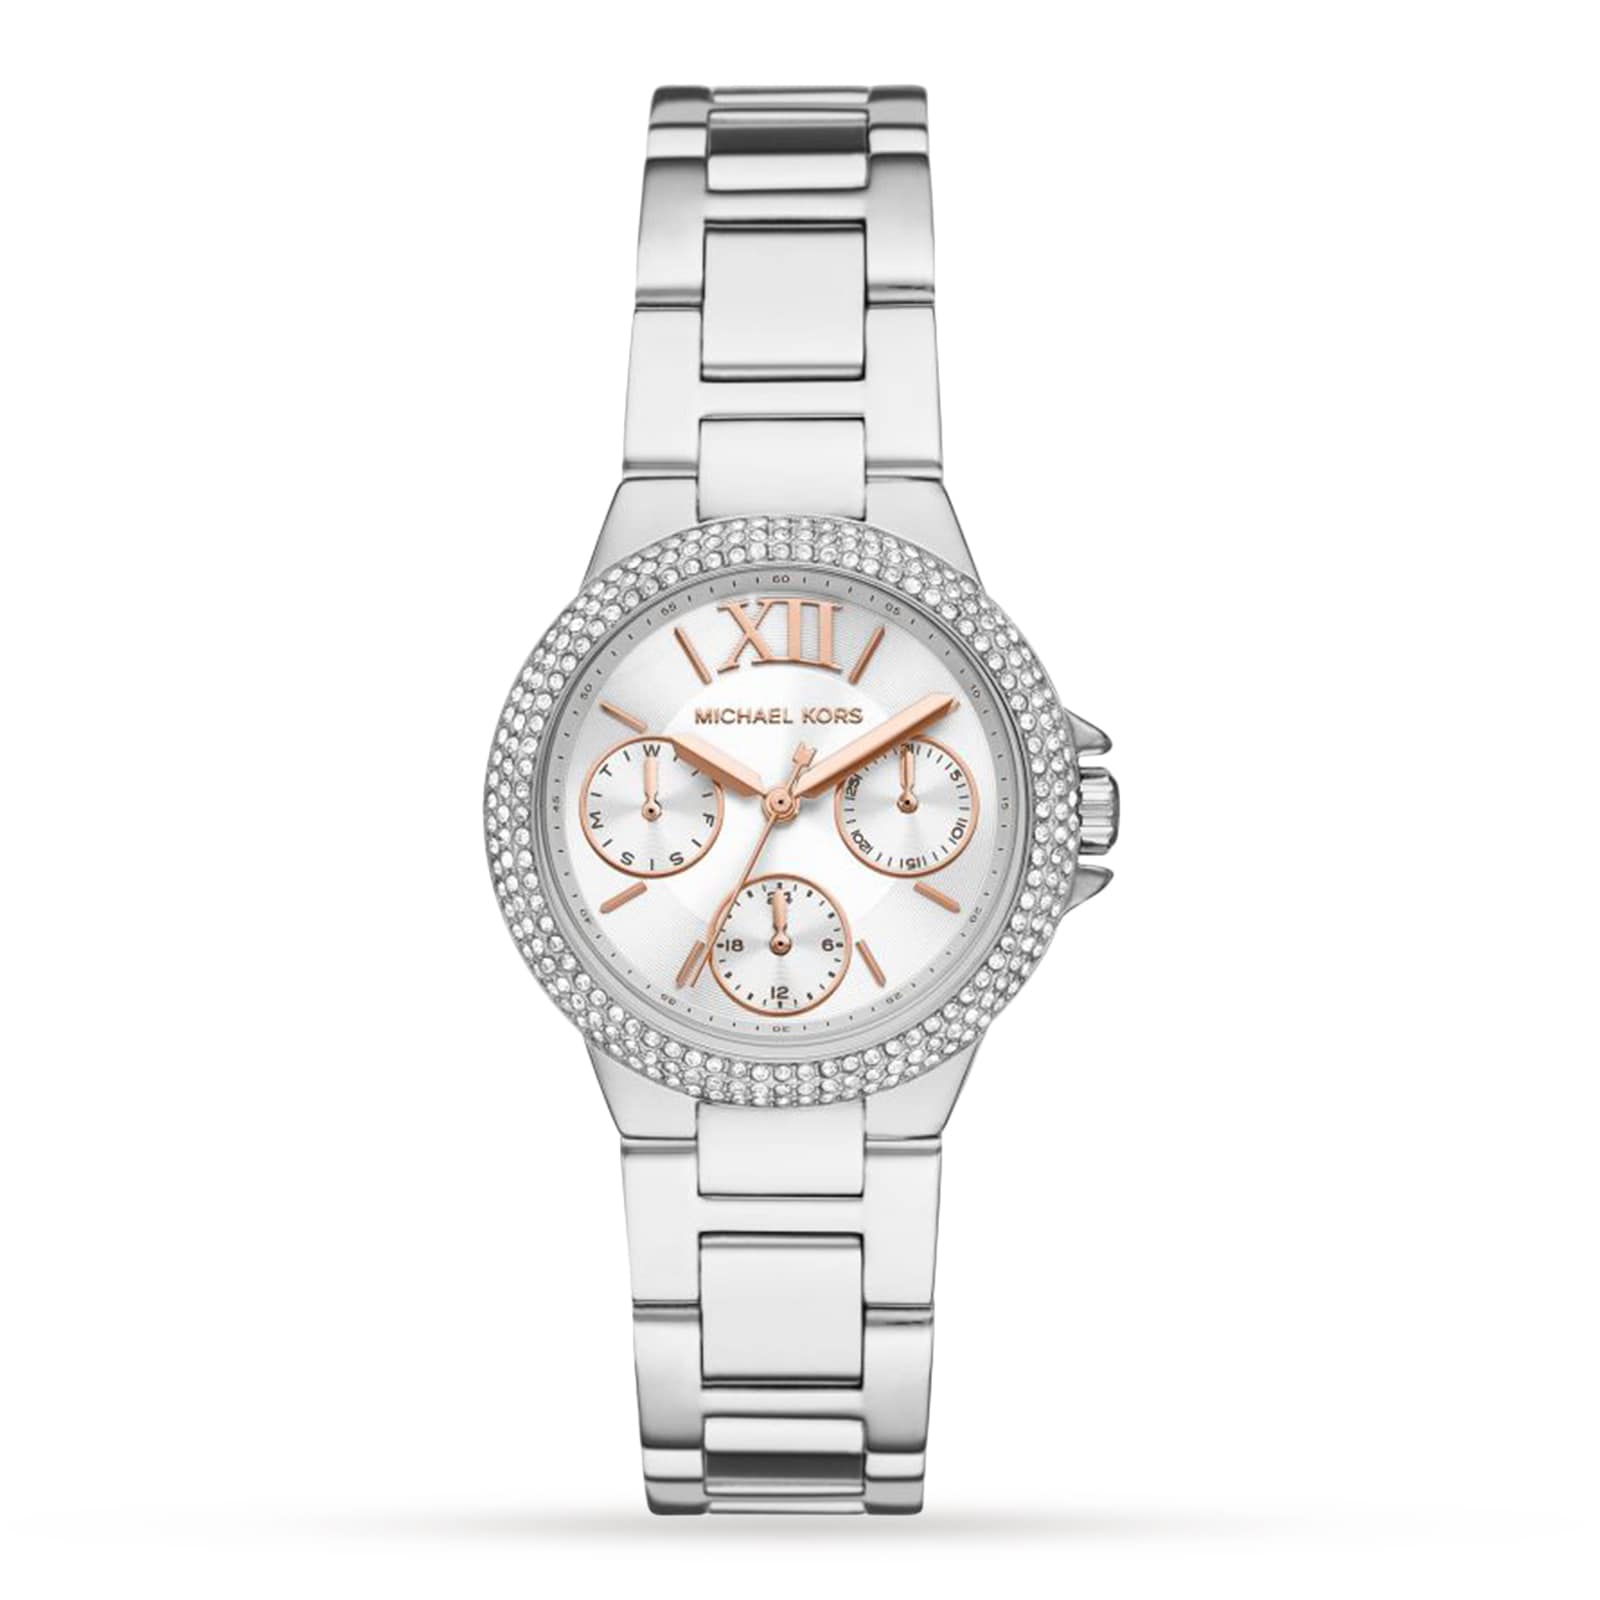 Michael Watches, Michael Kors Silver & Gold Watches on Sale UK | Goldsmiths